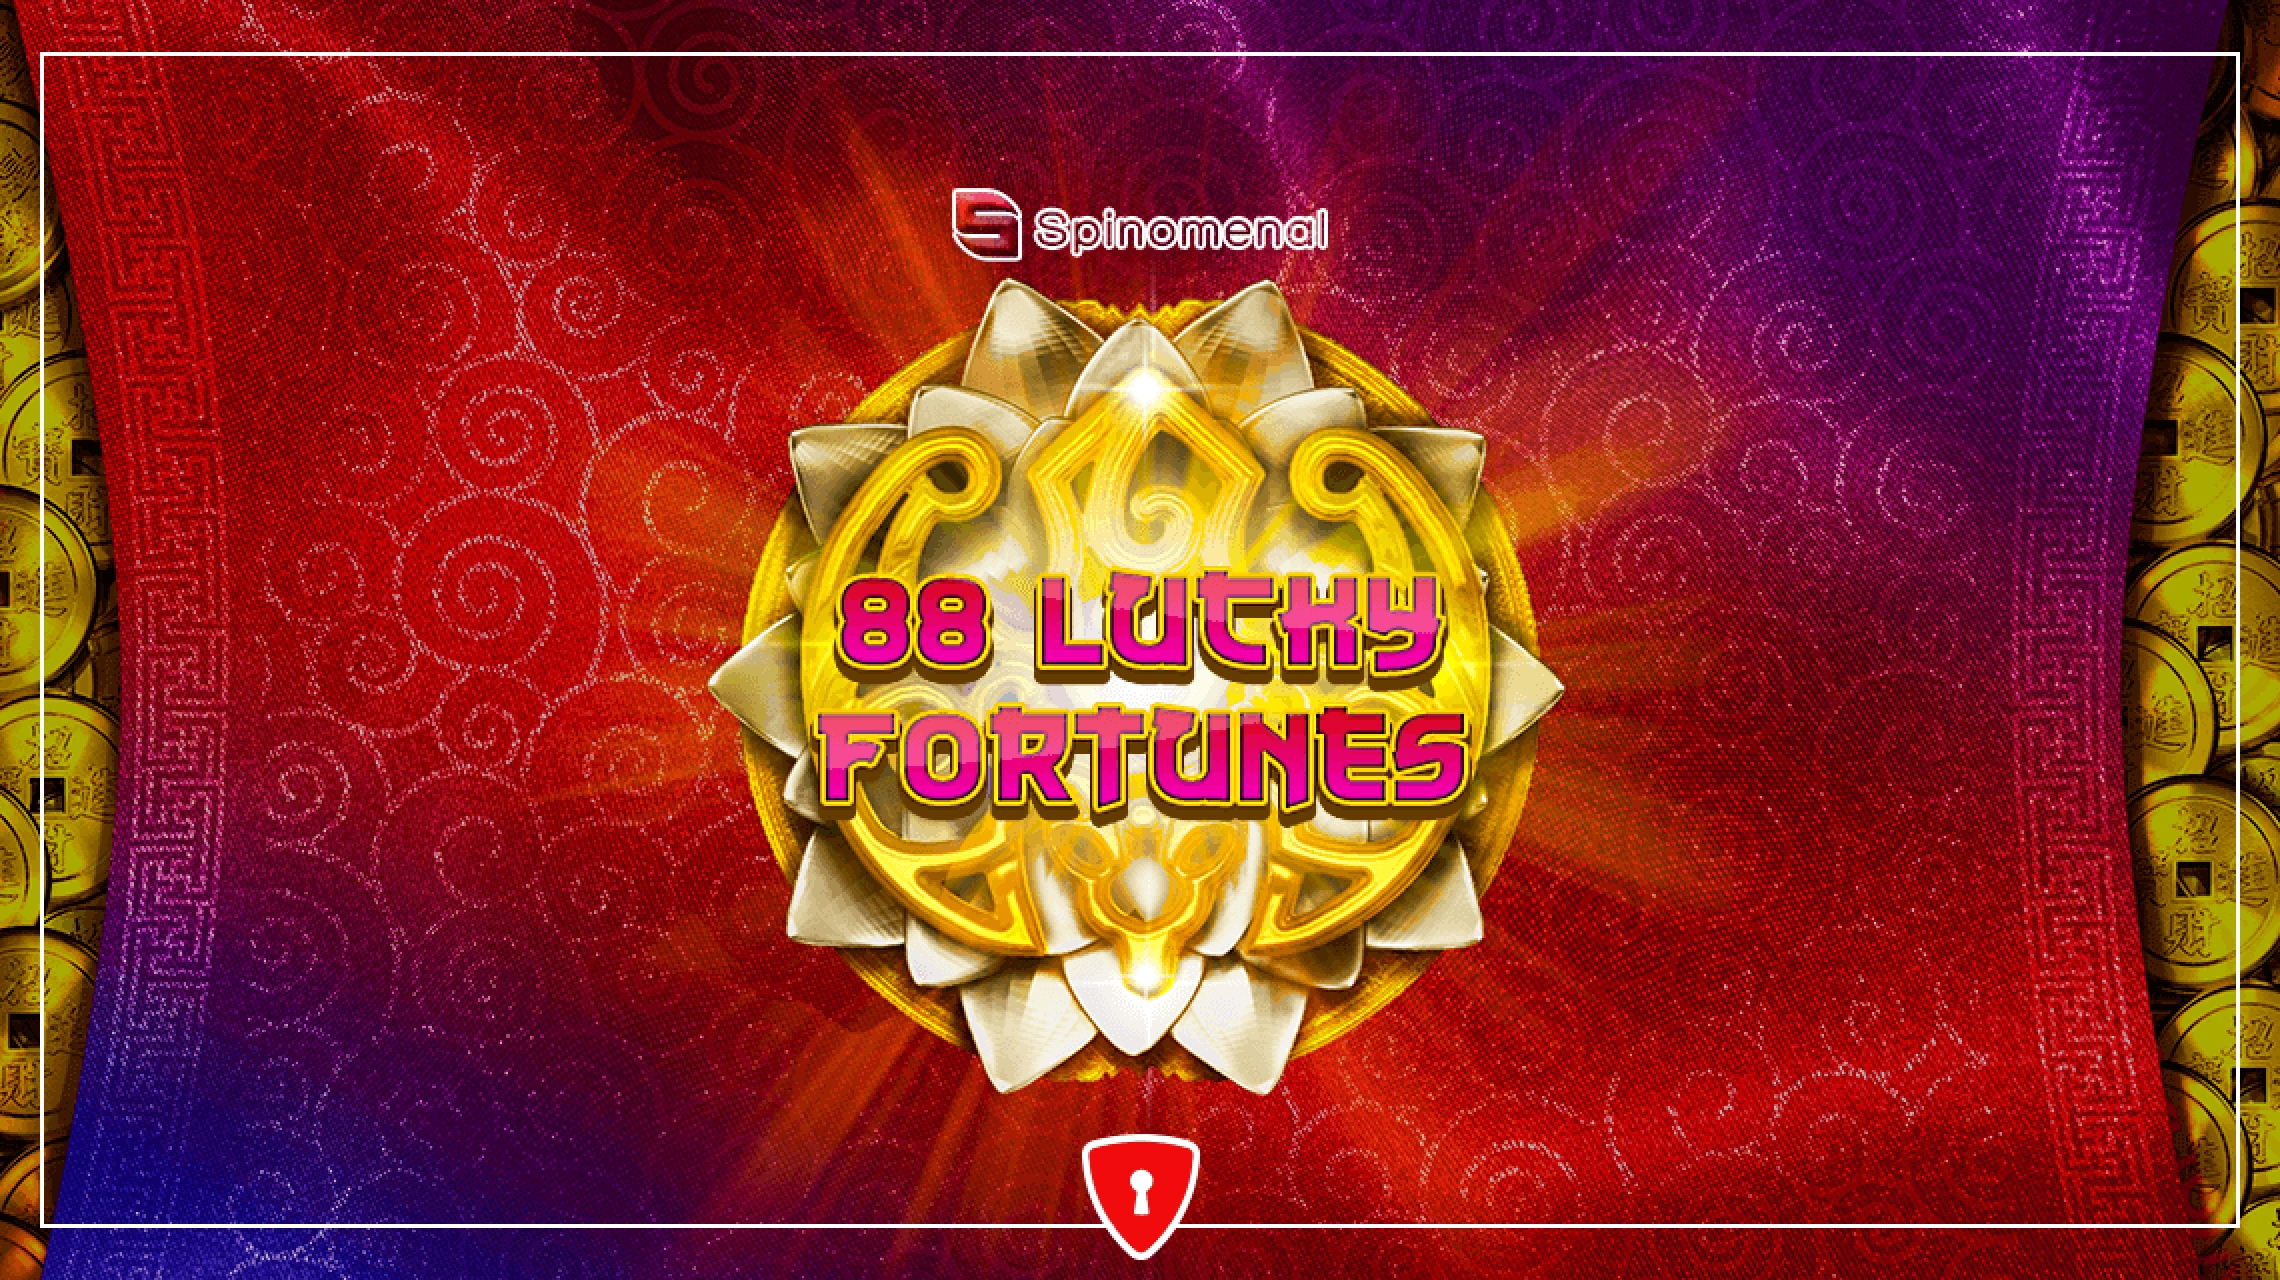 The 88 Lucky Fortunes Online Slot Demo Game by Spinomenal